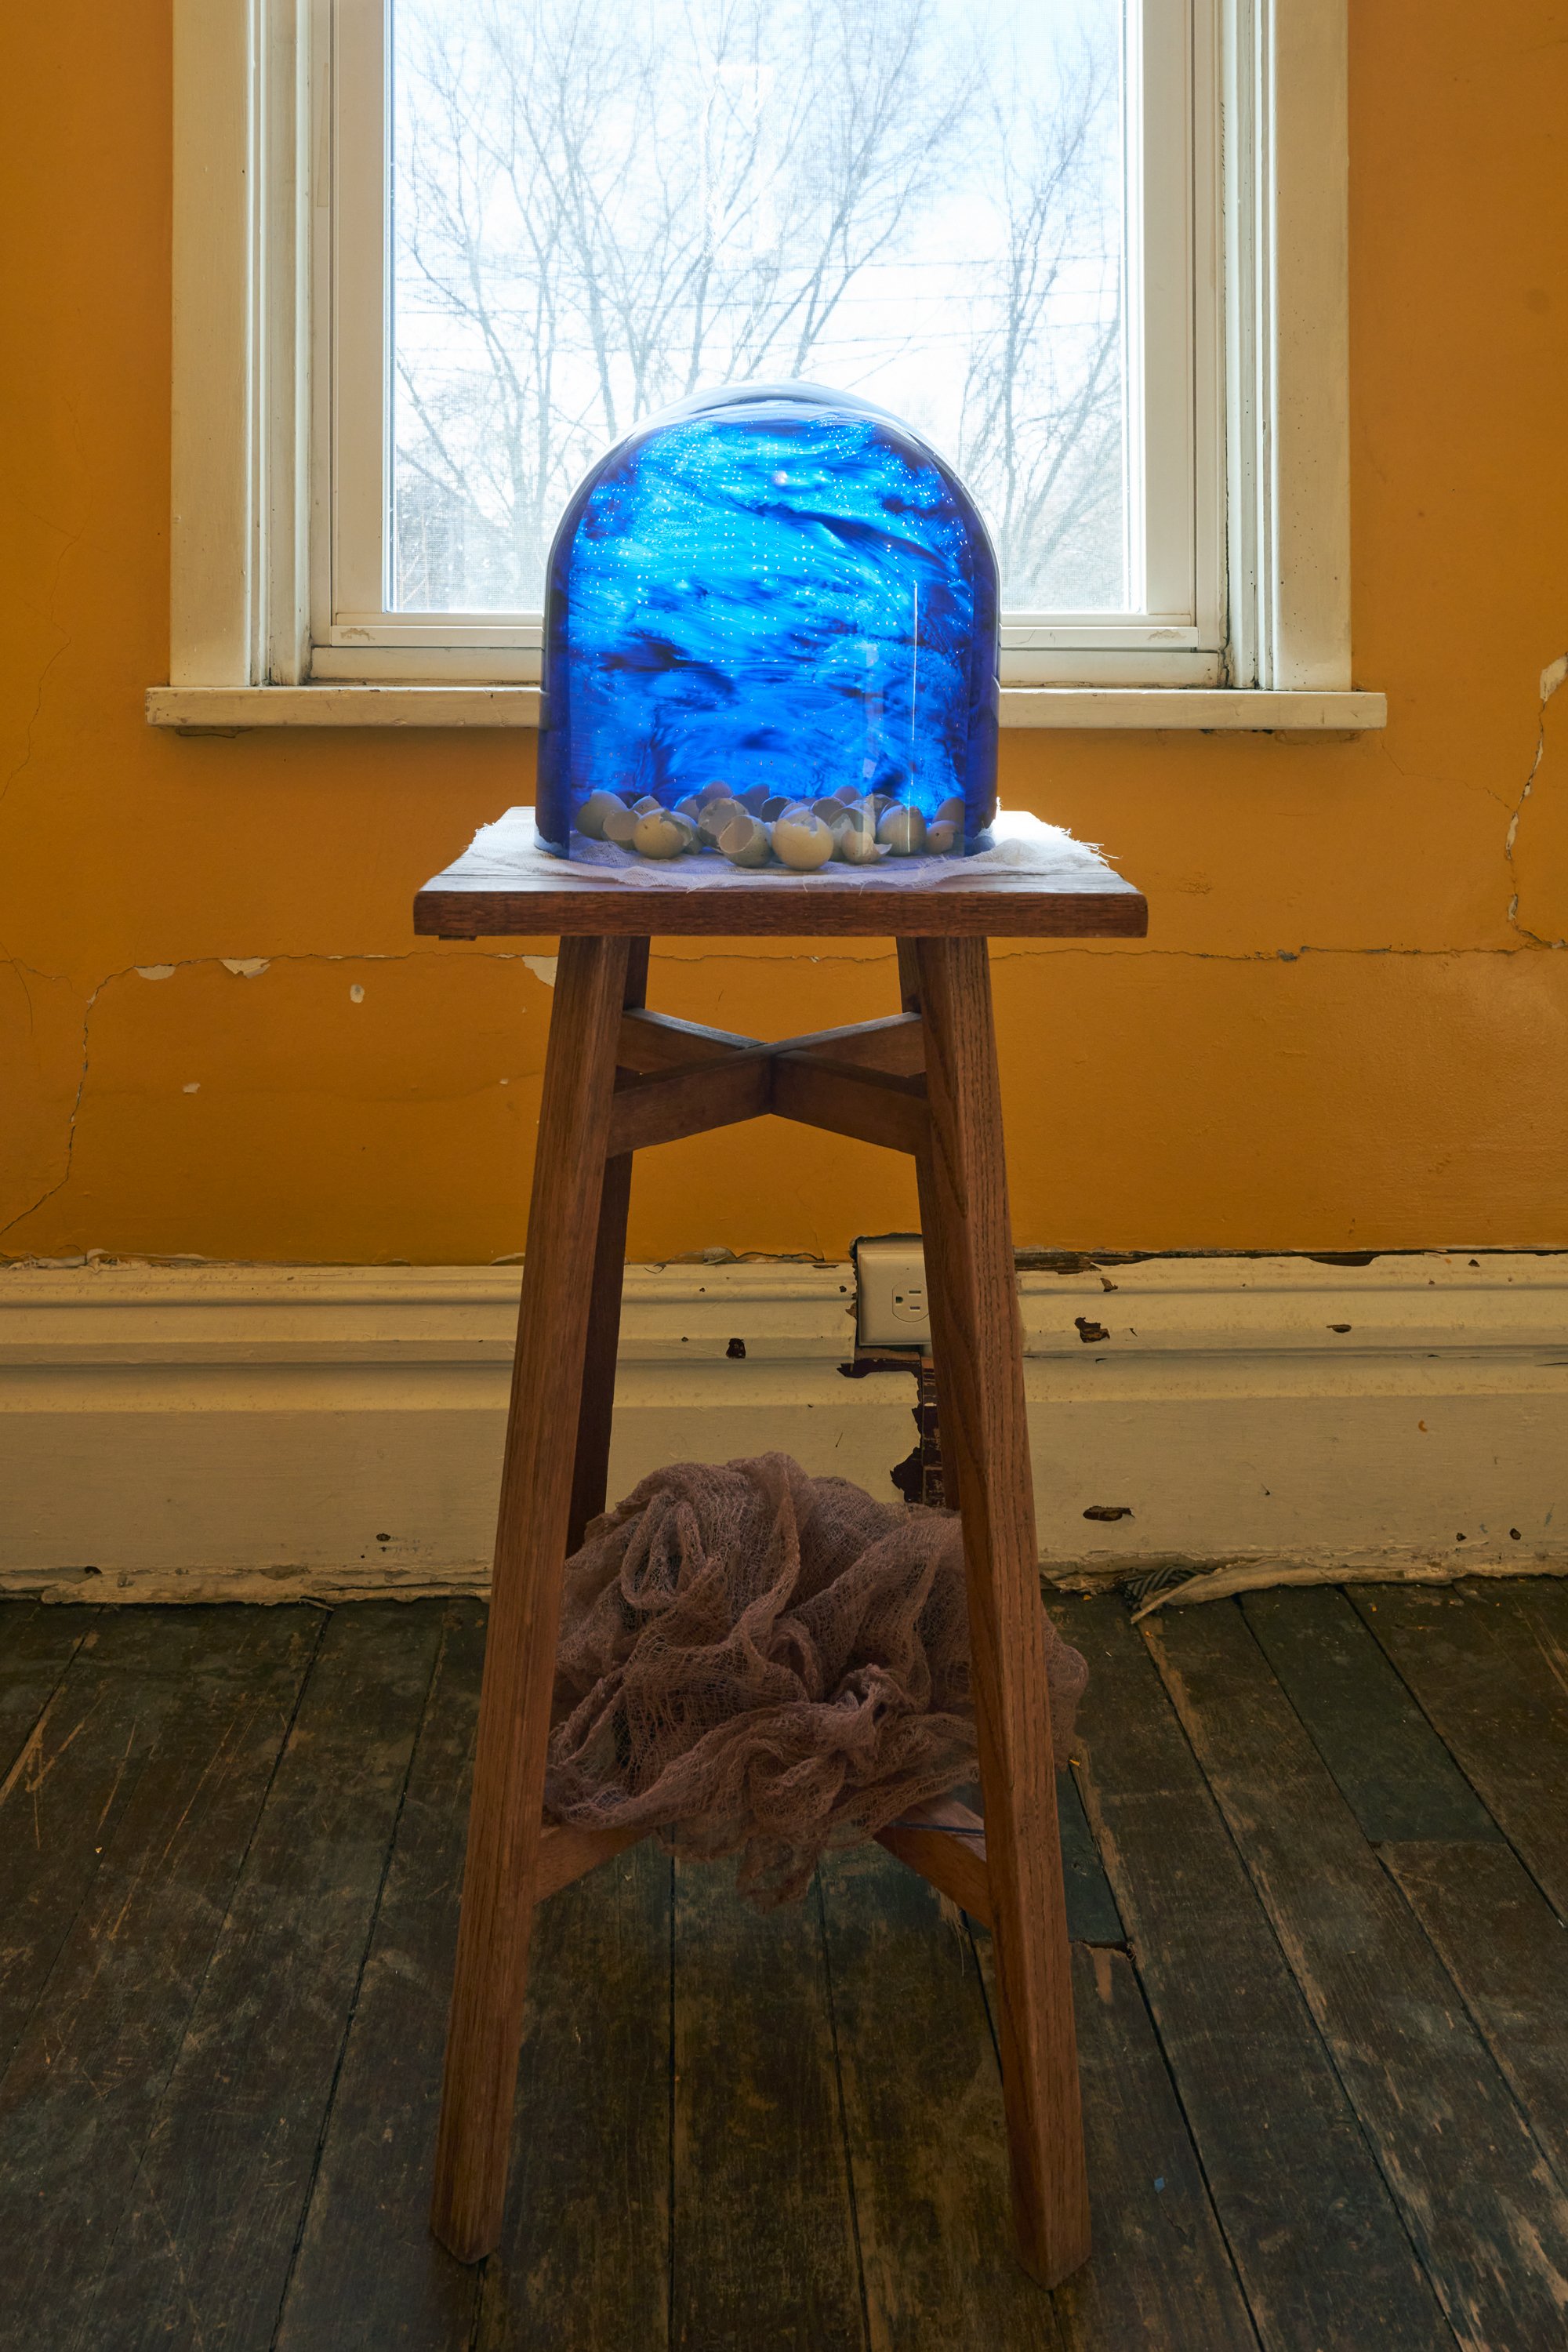   The clerk's wife claims her name, and her own night sky.  2021-2023. Acrylic paint on glass dome, celadon quail eggs, cheesecloth.  34 x 12 x 13 inches. 